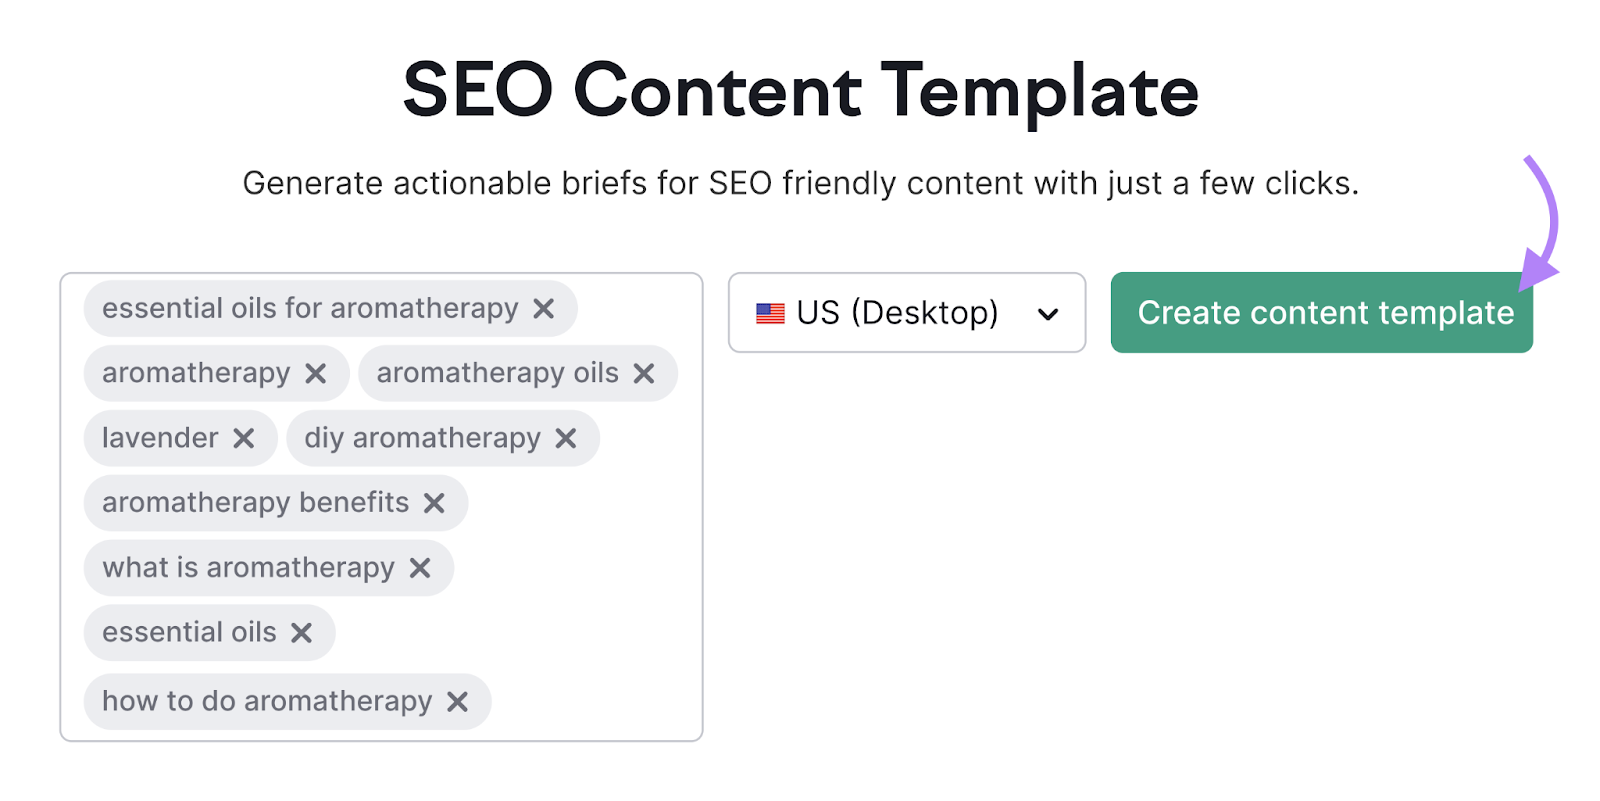 keywords like aromatherapy, essential oils, and lavender entered into Semrush's SEO content template tool